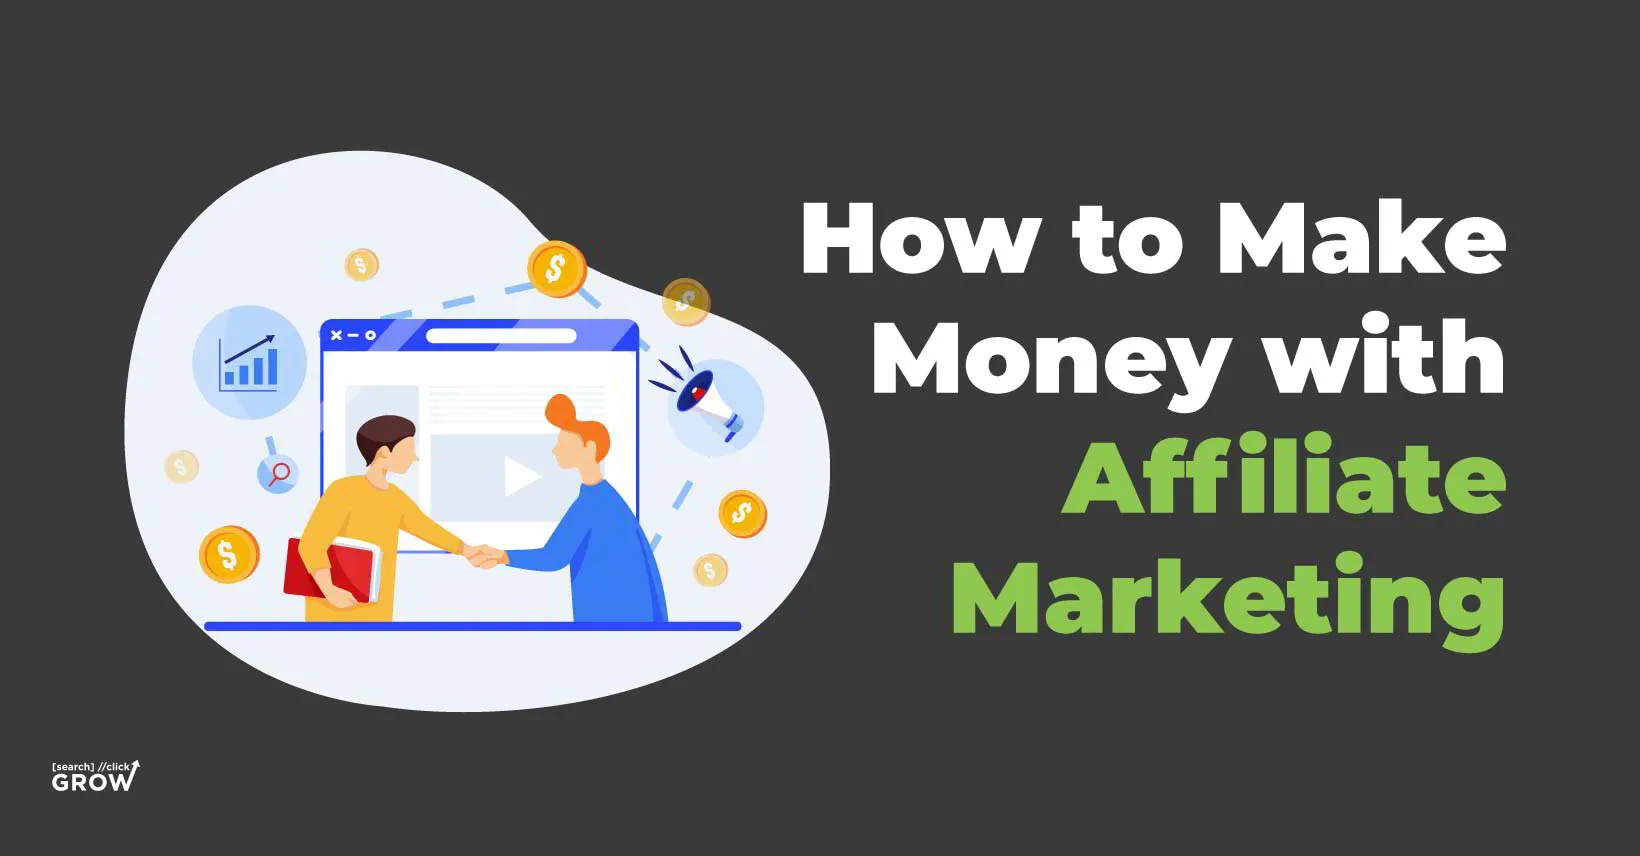 How to Use Affiliate Marketing to Make Money With Your Blog